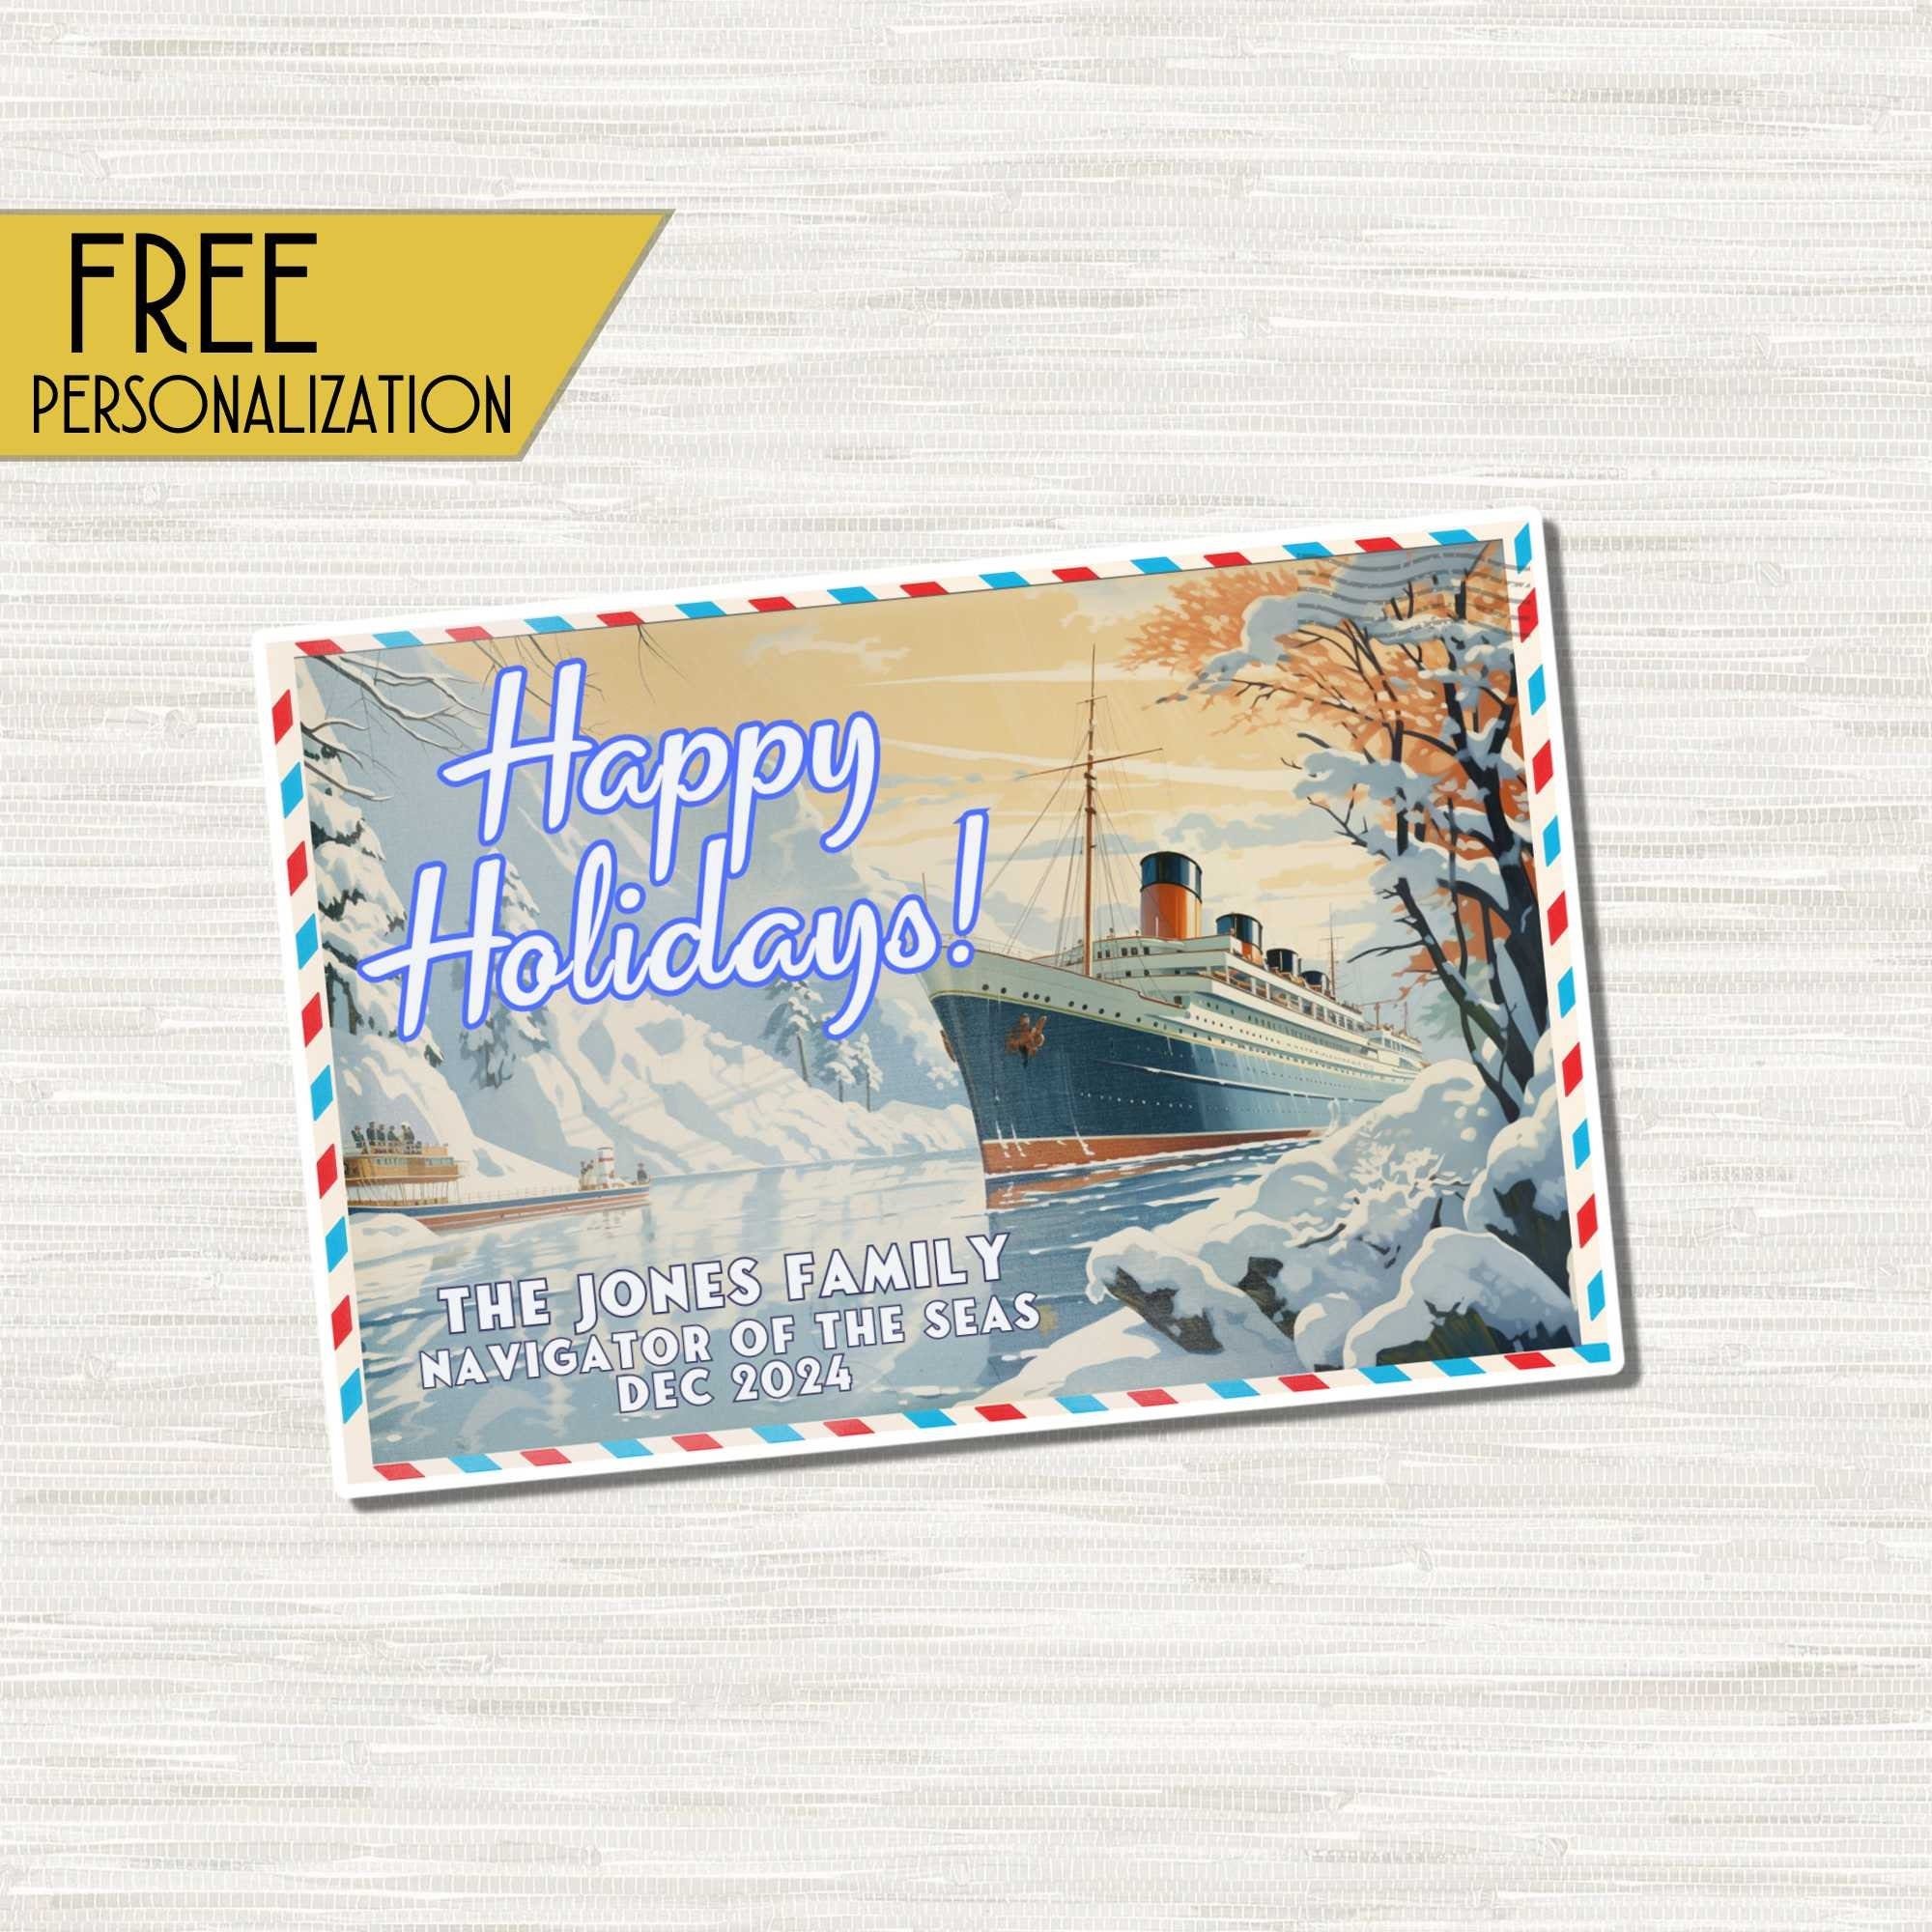 Vintage Holiday Postcard - Personalized Cruise Door Magnet | Cruise Decoration | Christmas Cruise Magnet